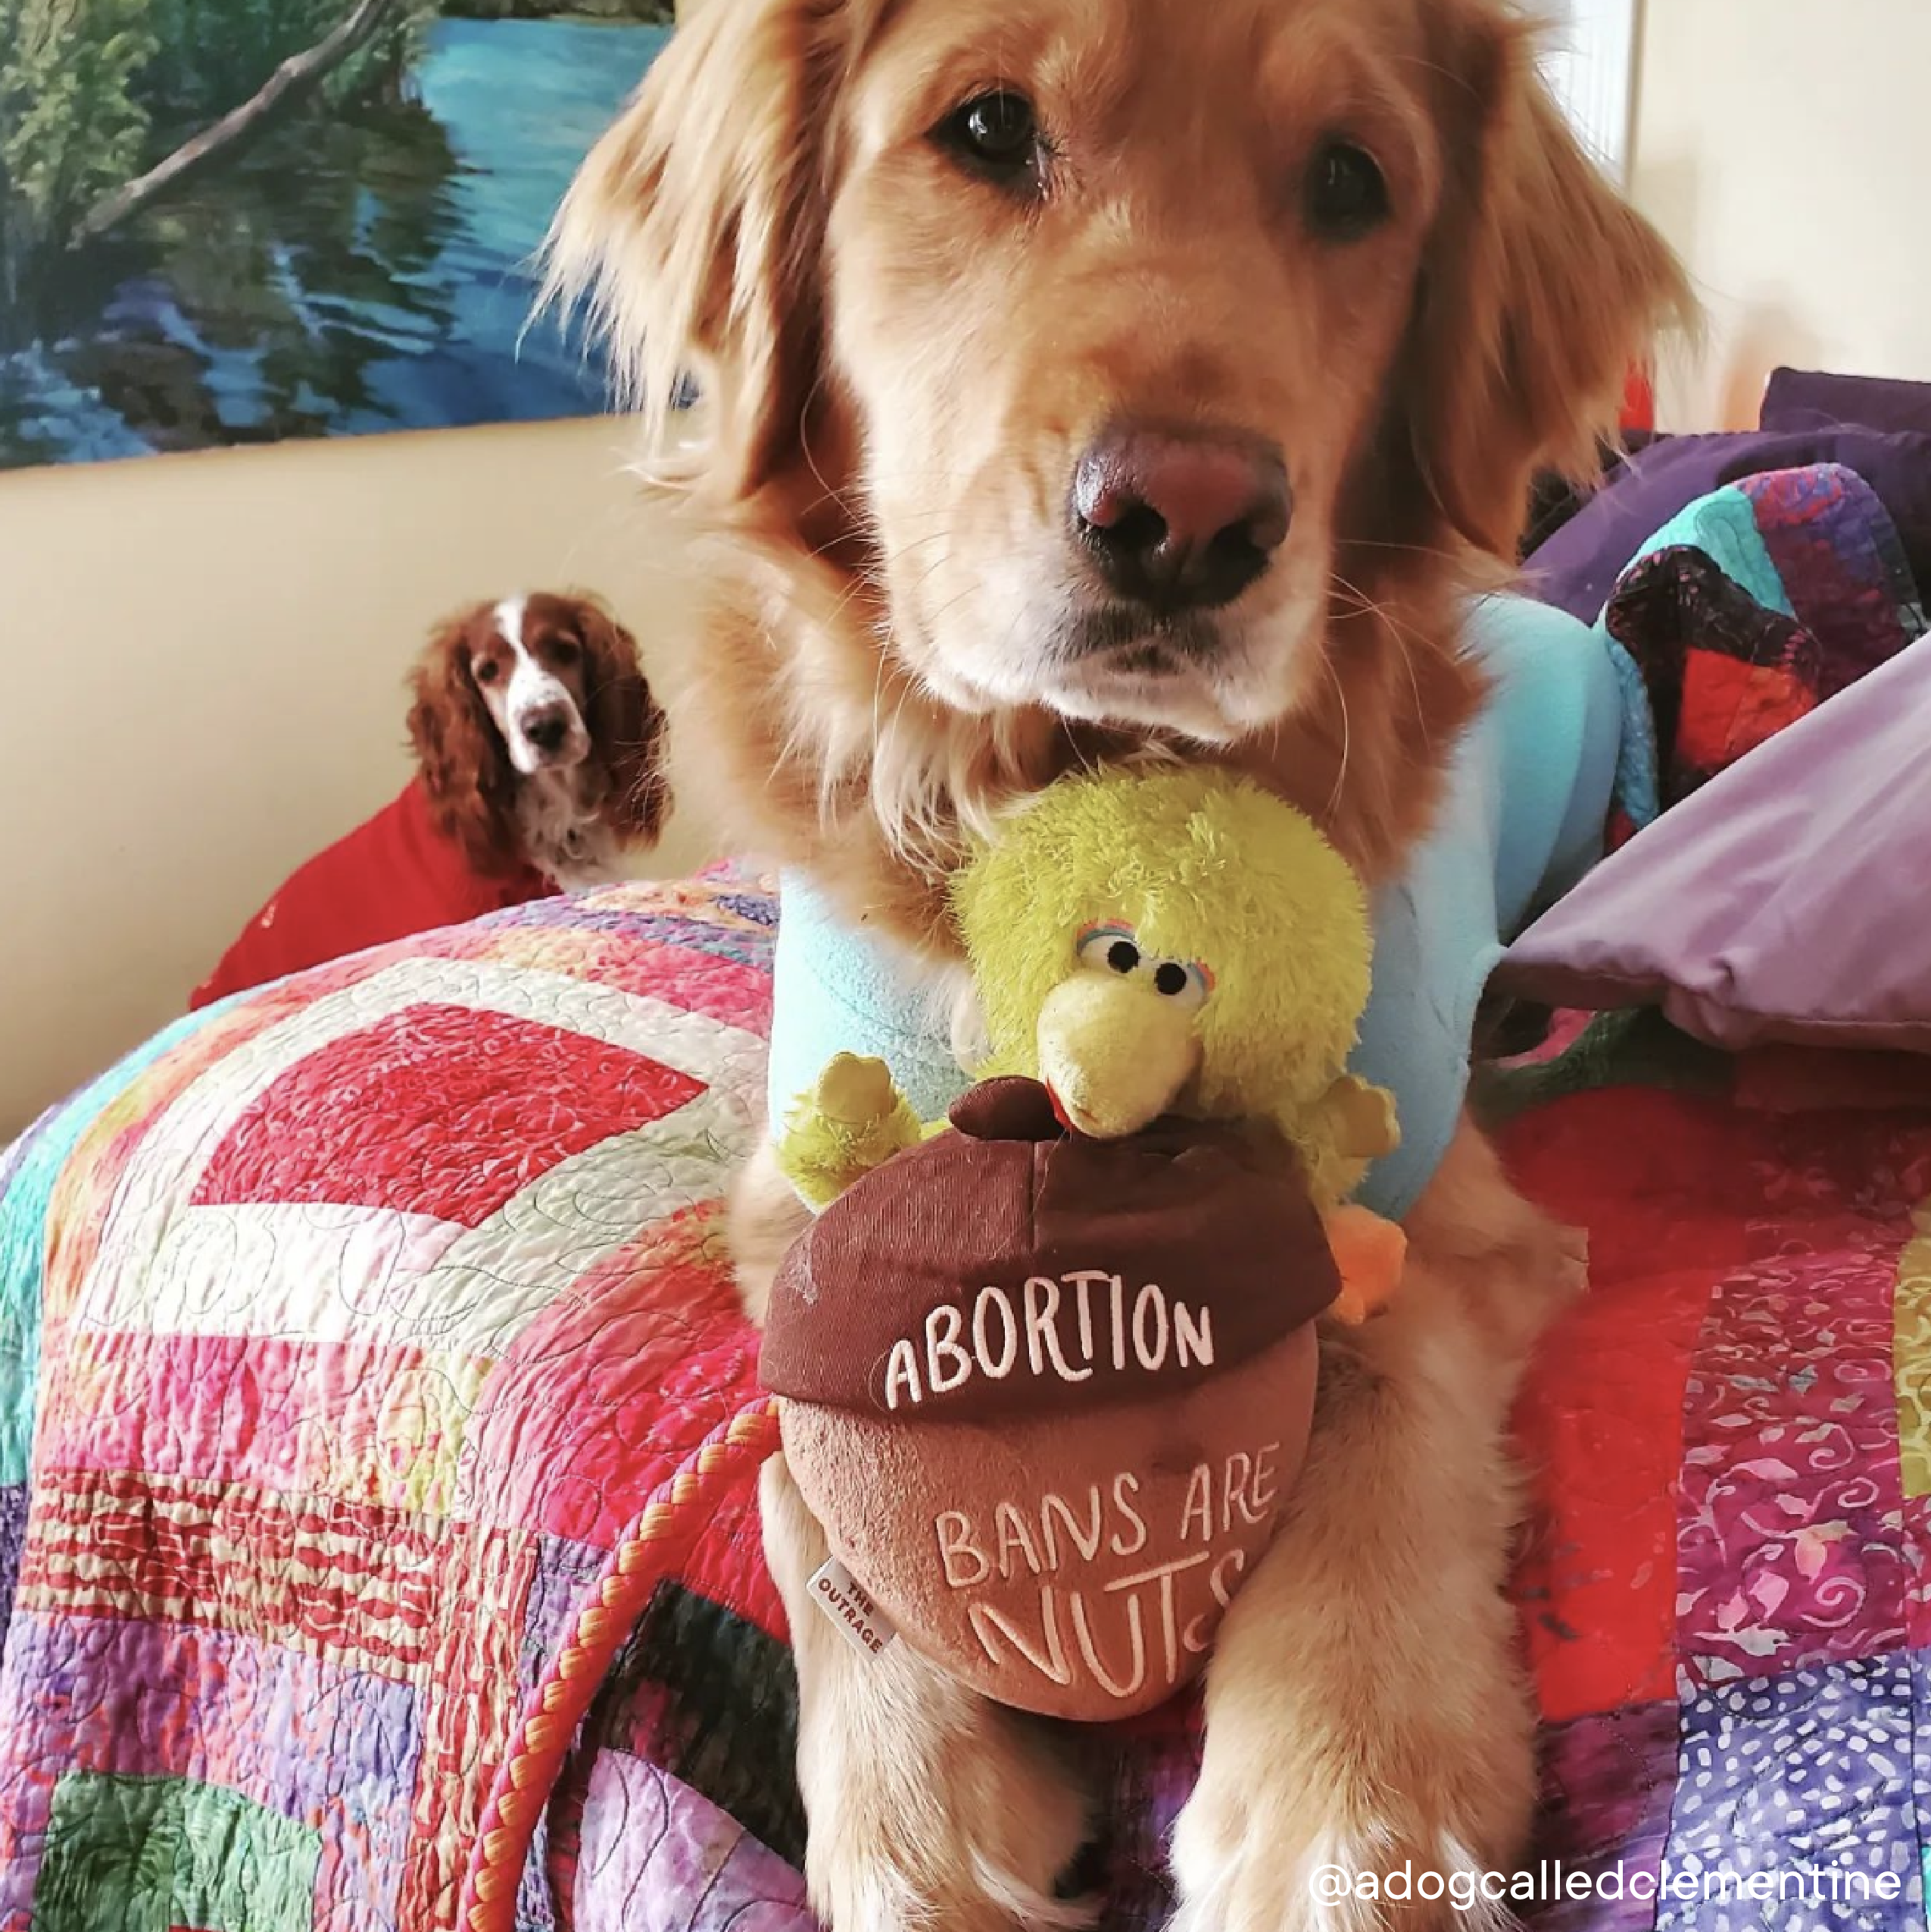 Abortion Bans Are Nuts Plush Dog Toy